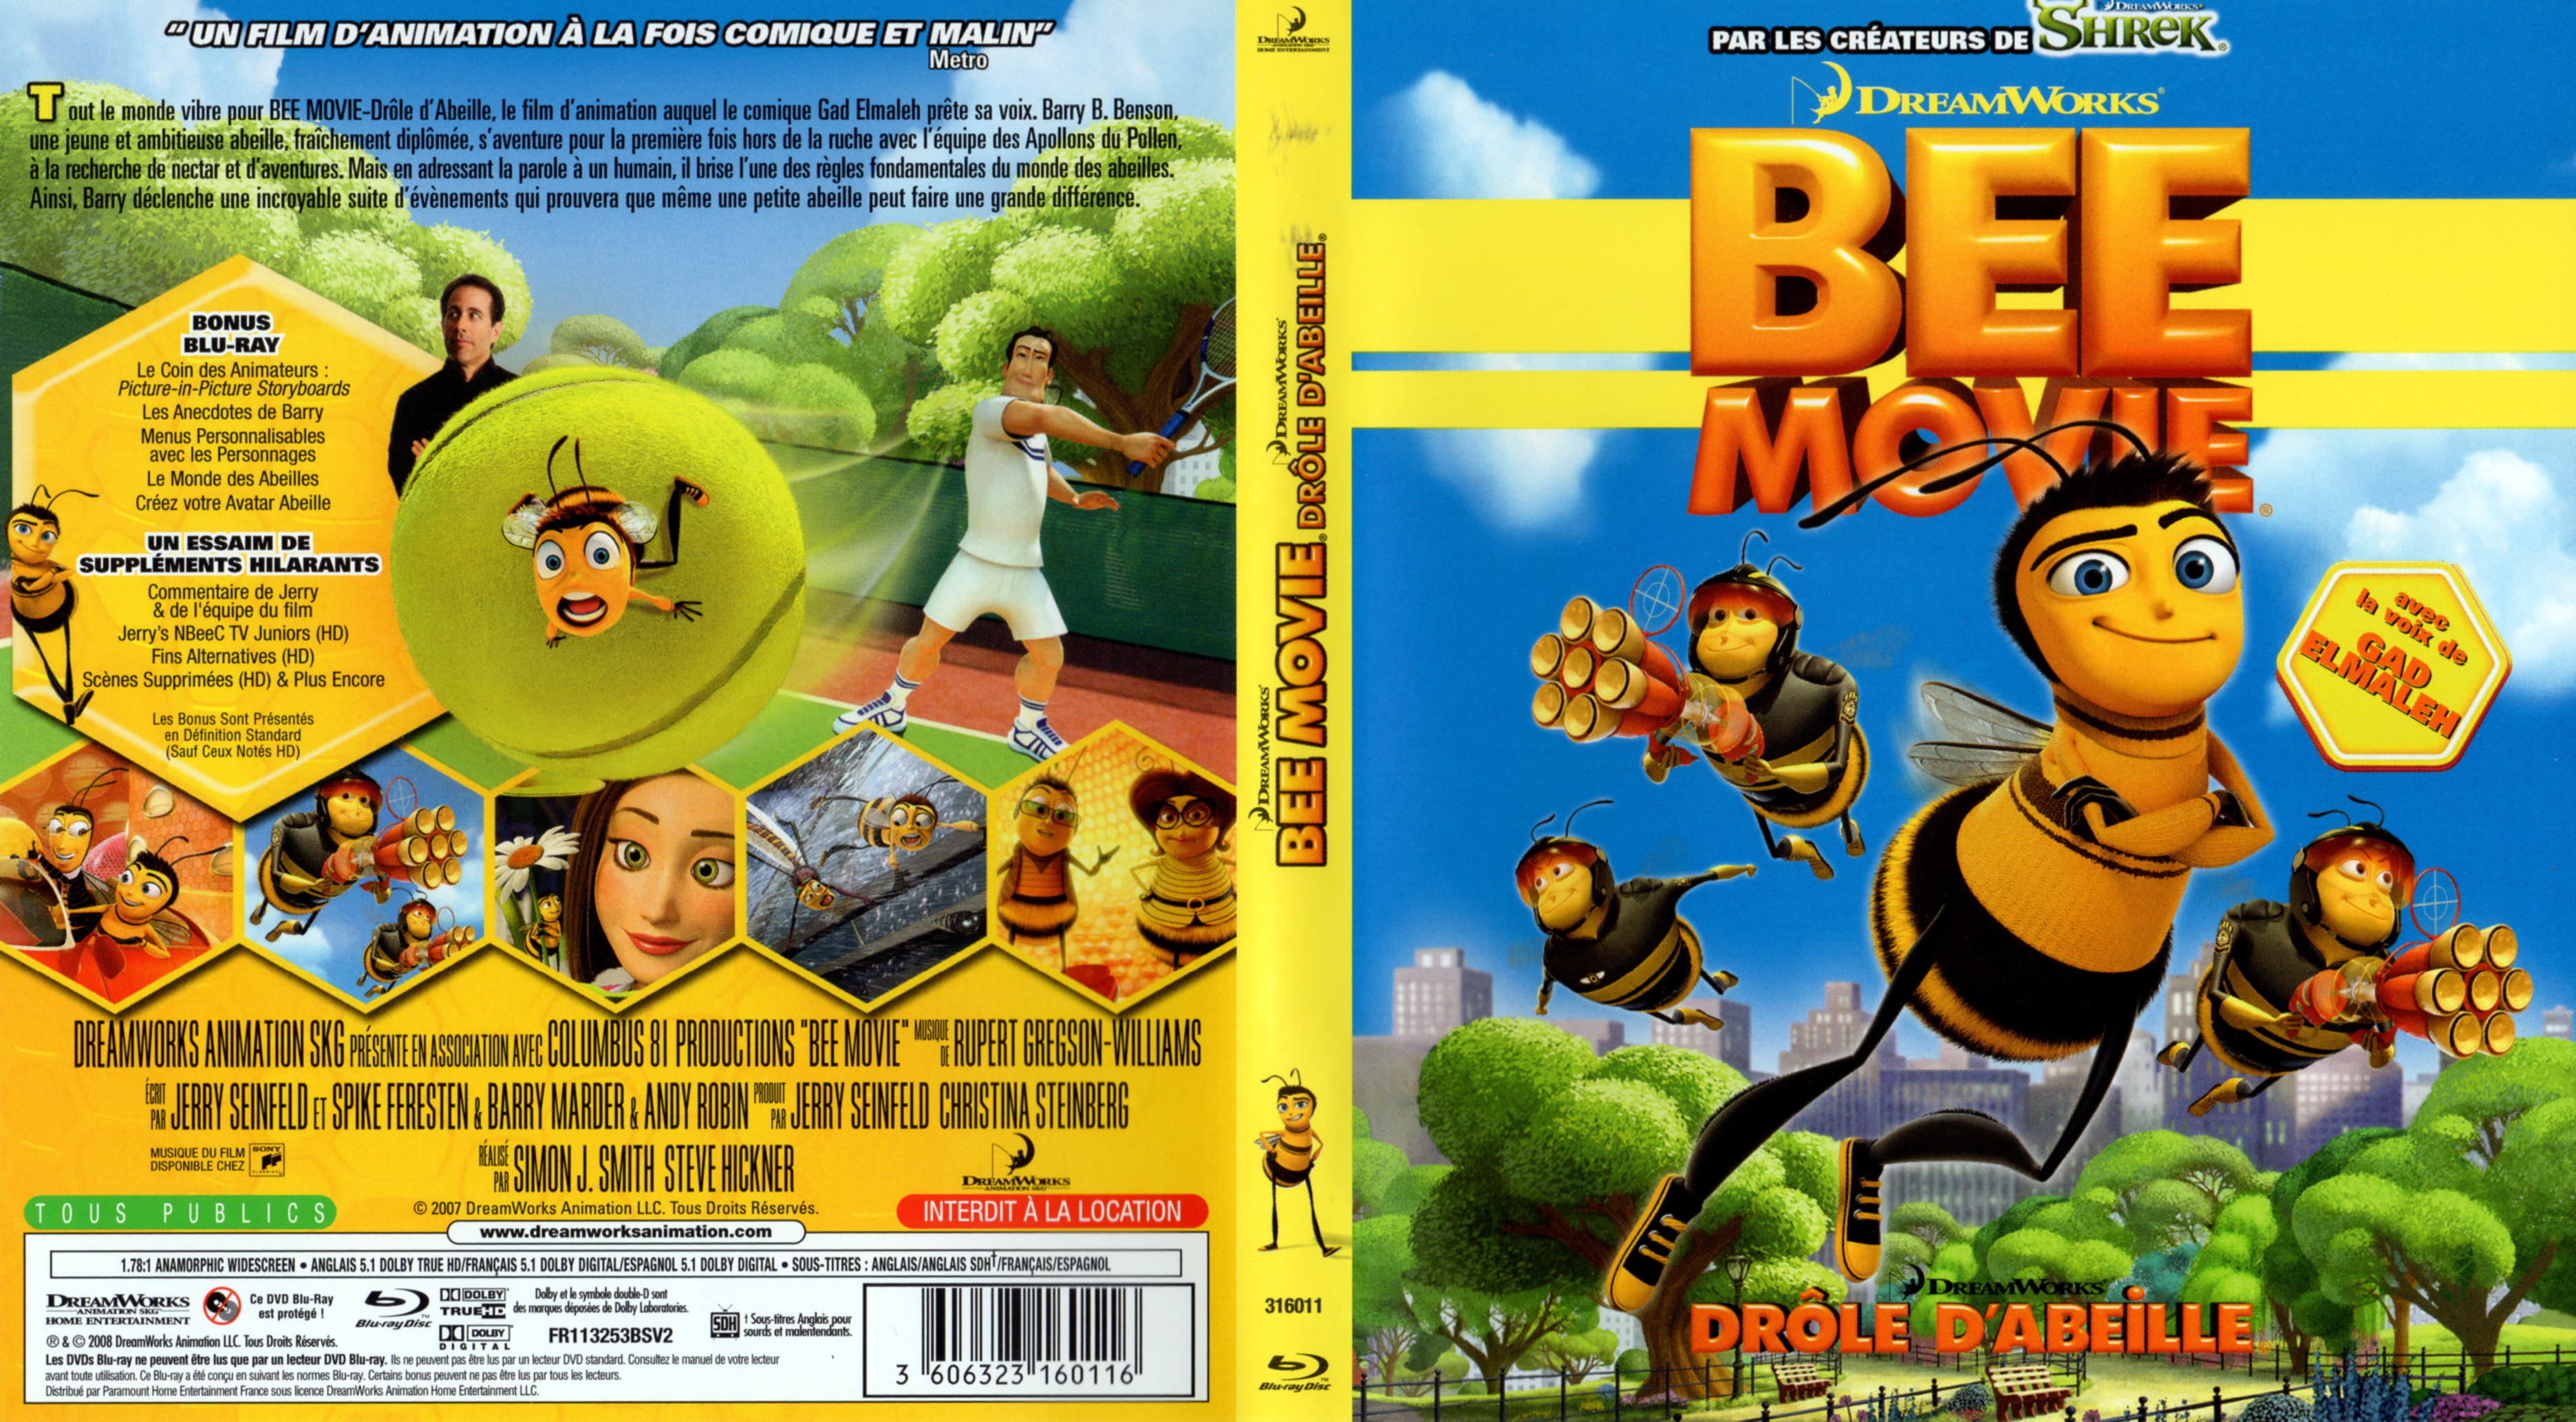 Jaquette DVD Bee movie drole d.